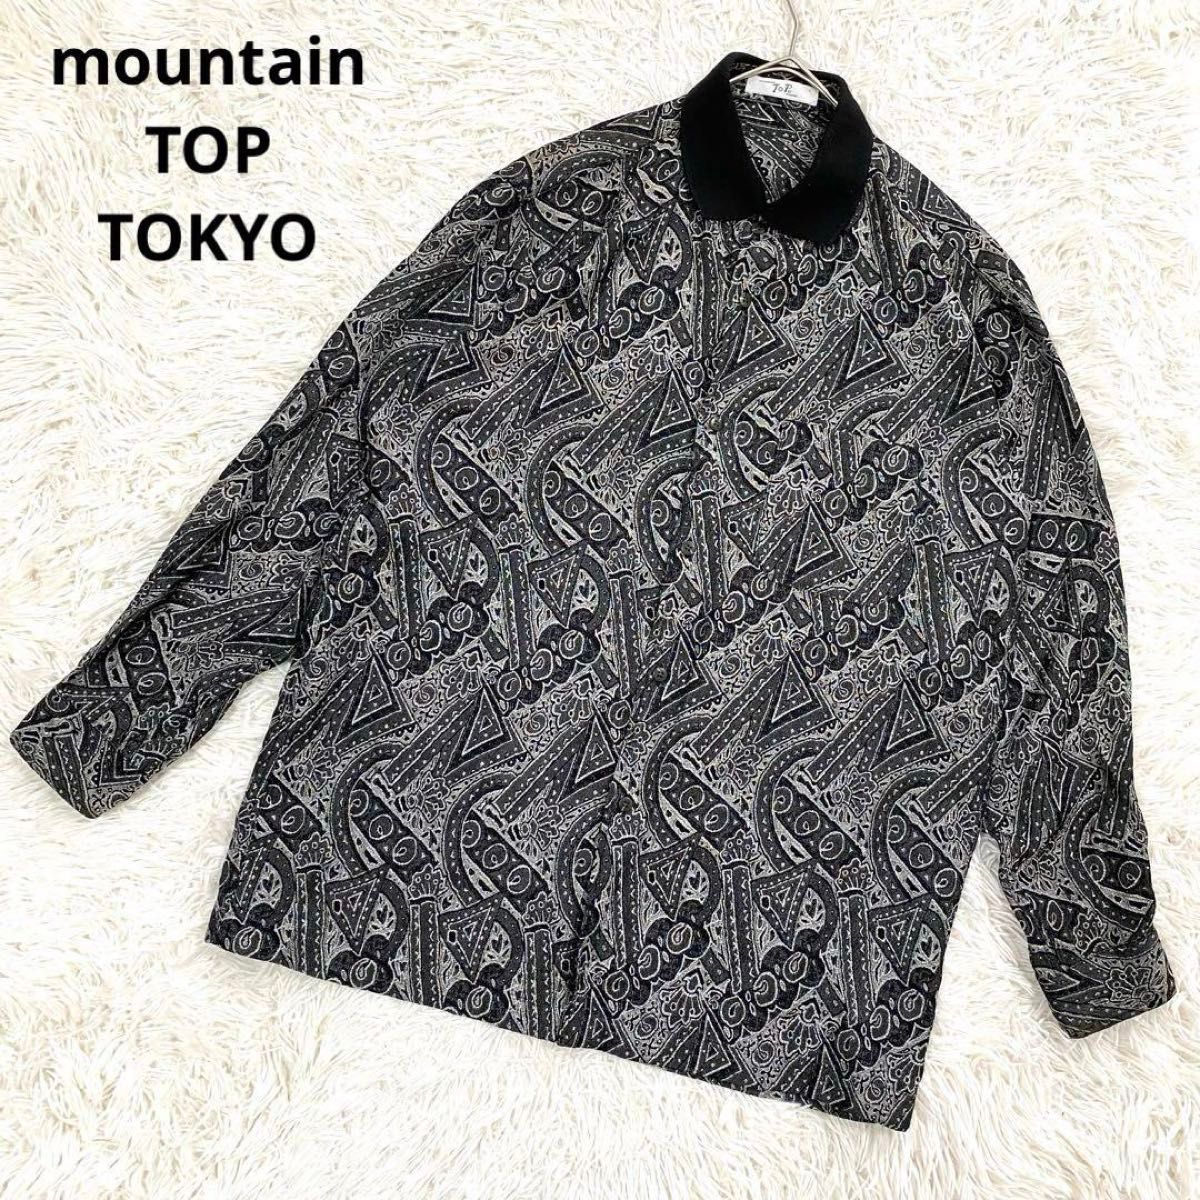 mountain TOP TOKYO シルク混 シャツ L 総柄 黒 グレー 古着 レトロ